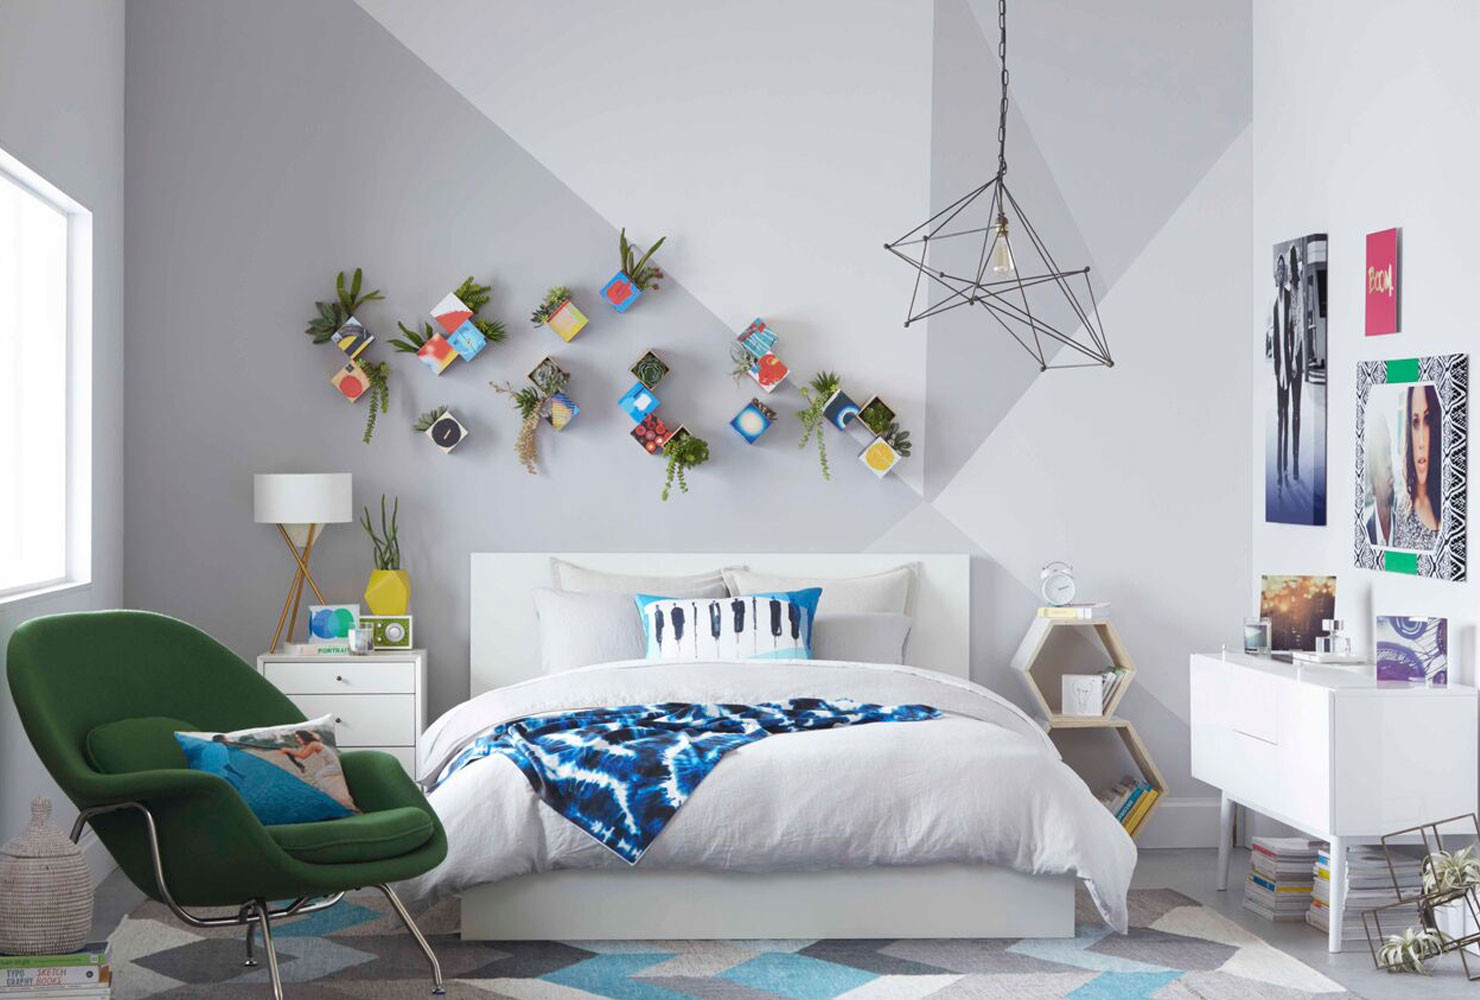 Bedroom Decor Ideas DIY
 24 DIY Bedroom Decor Ideas To Inspire You With Printables